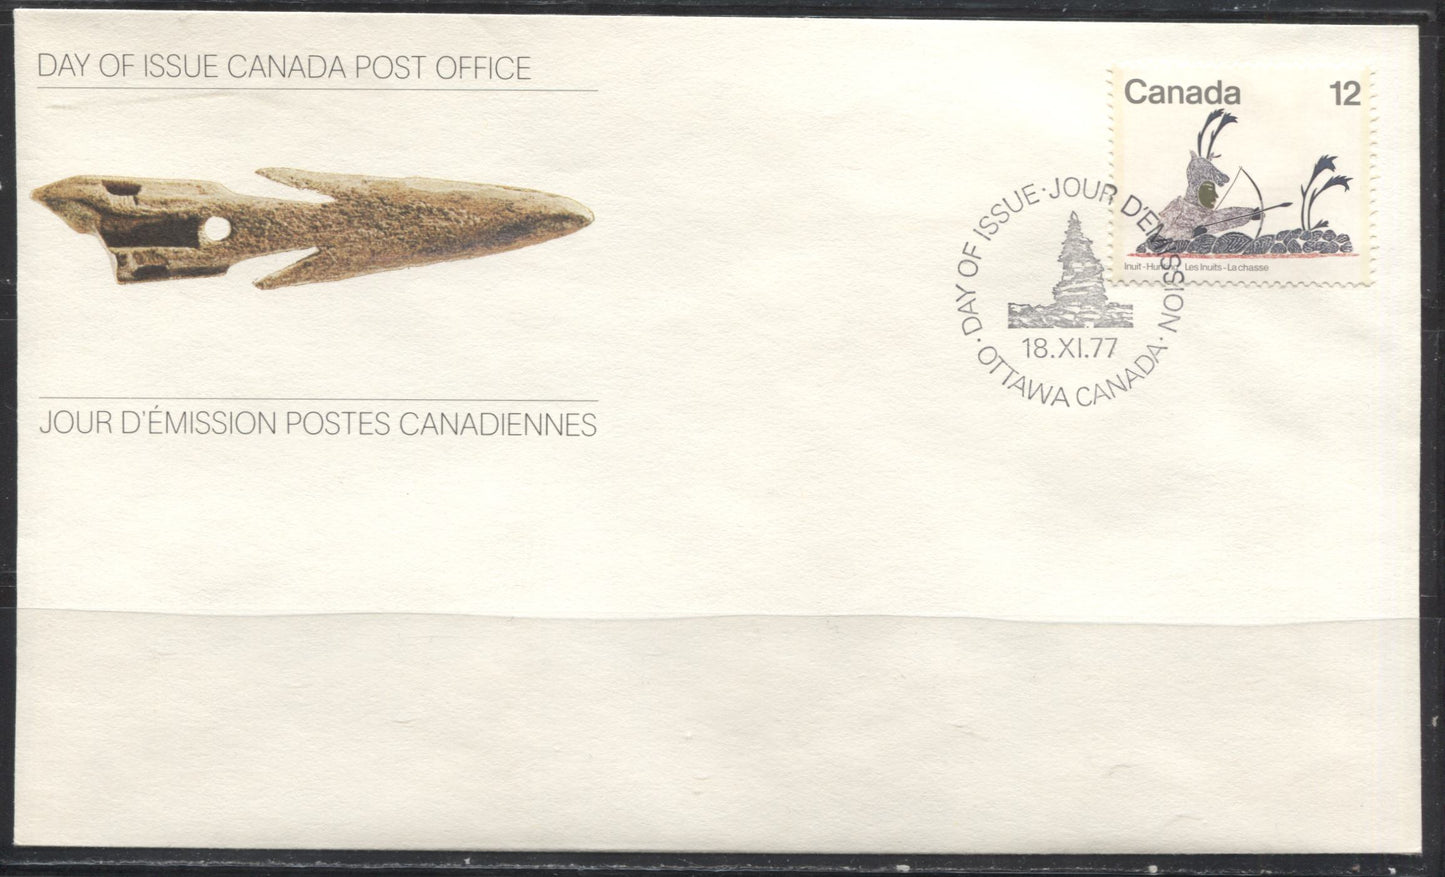 Canada #704i, 732/750 1977 Commemoratives - A Group of 15 Canada Post Official FDC's Franked With Singles, Pairs and Blocks, Different Envelope Fluorescence Levels